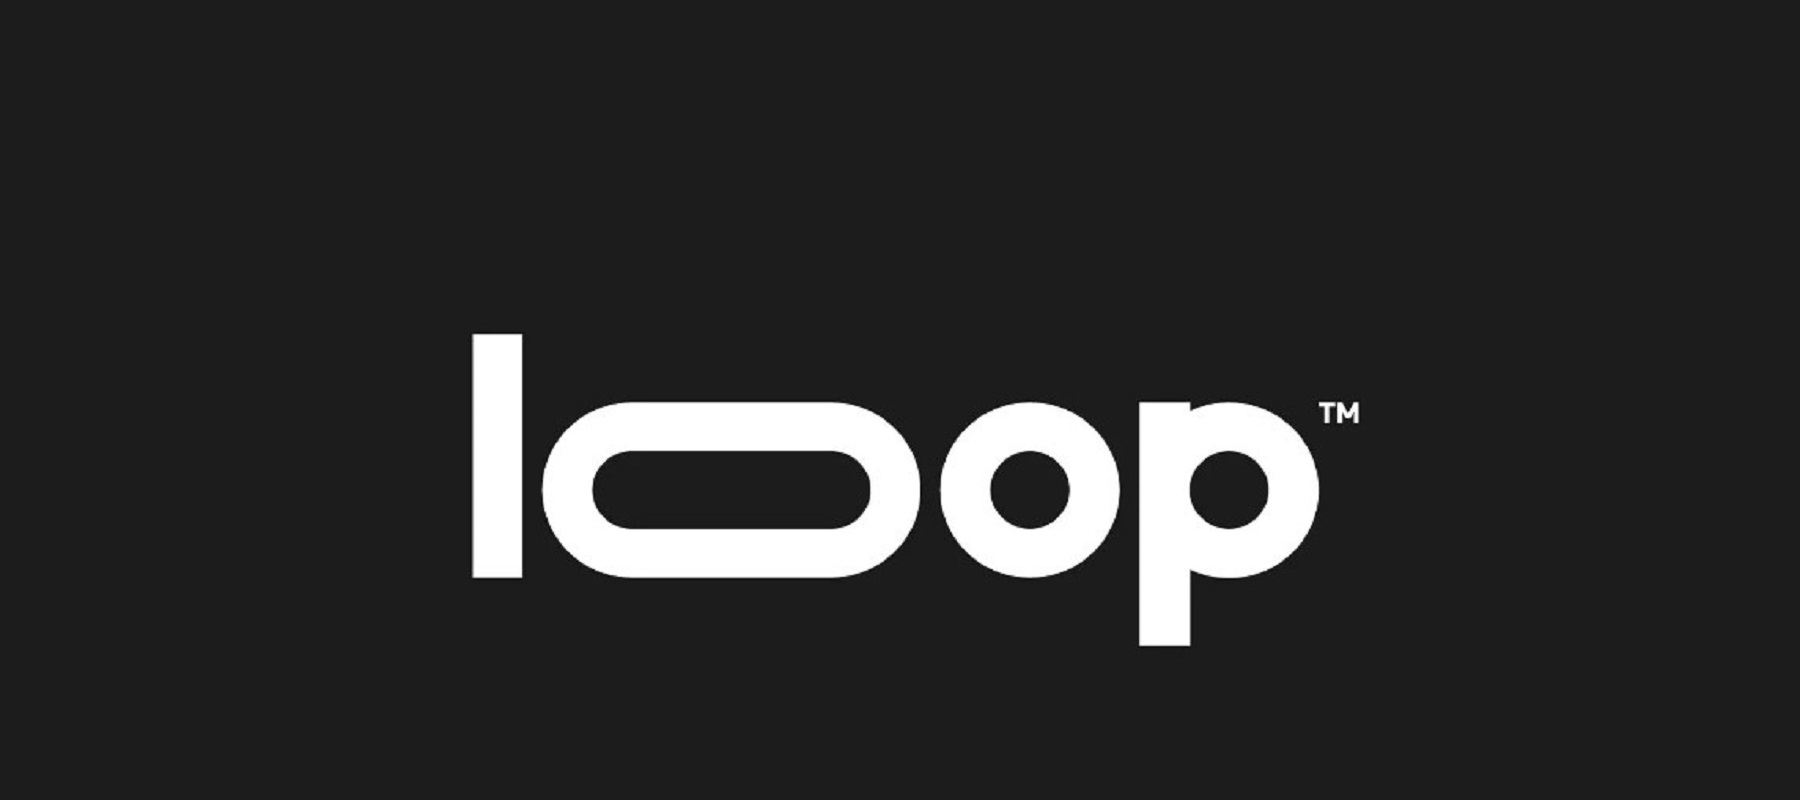 Loop Media partners with AssemblyAI to launch its AI-powered brand safety solution